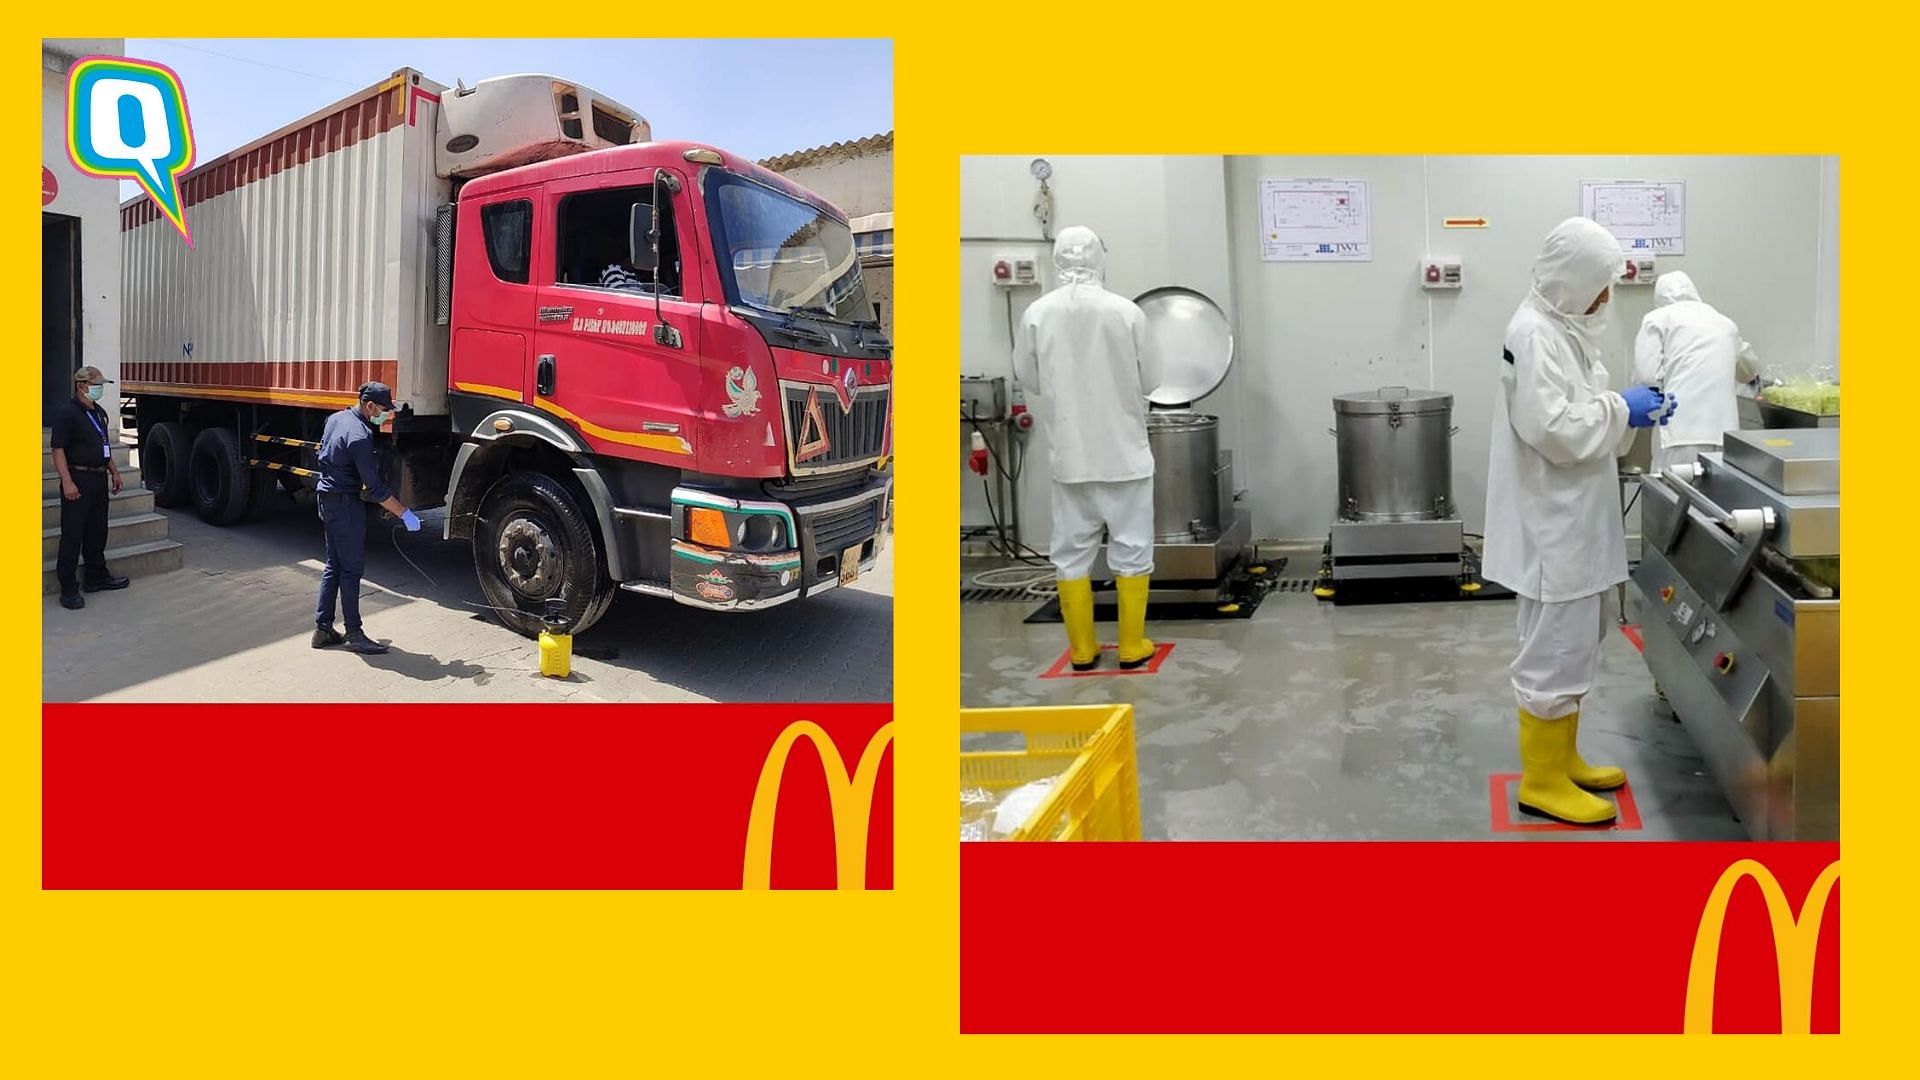 Images from McDonald’s India’s factory